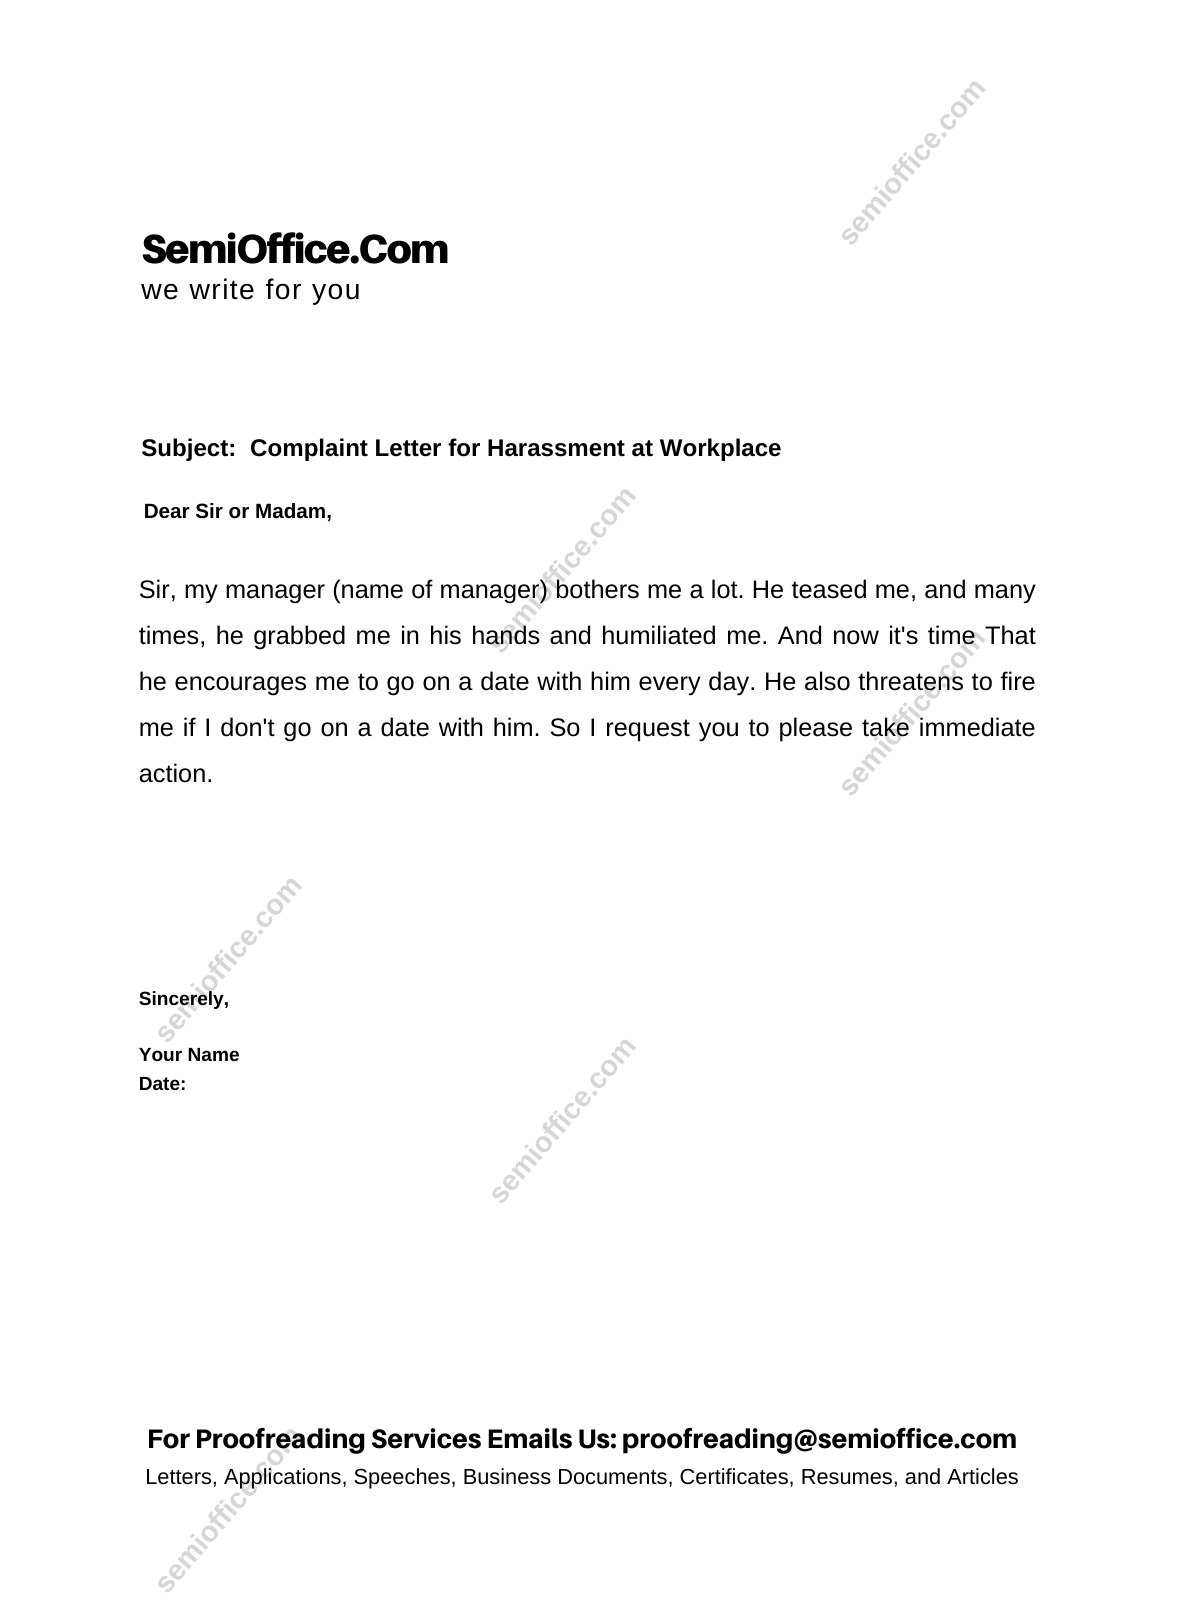 Sample Letter Reporting Harassment At Work Semiofficecom 8645